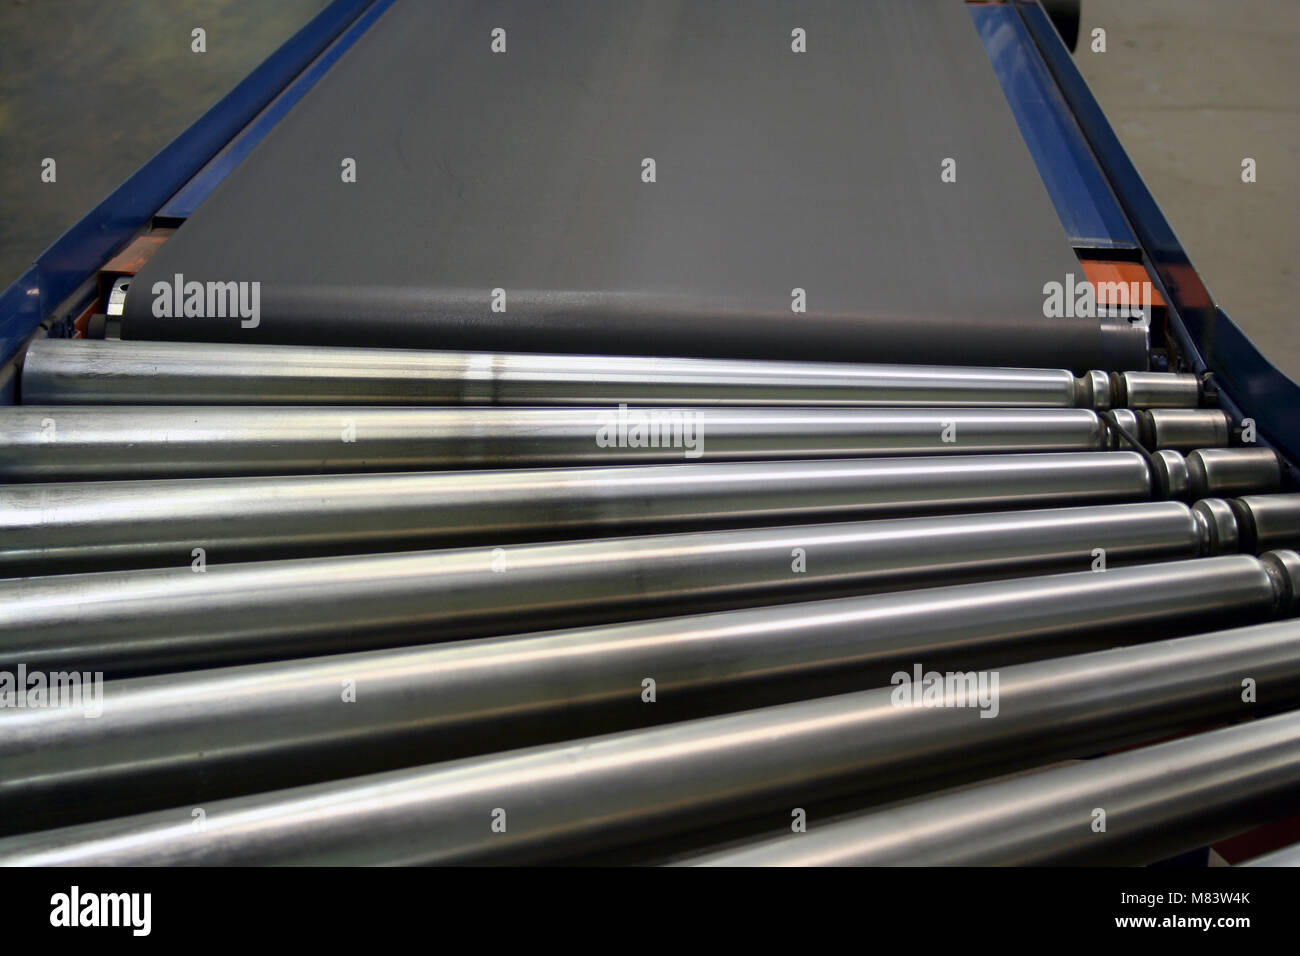 an image of some Conveyor Rollers and belt Stock Photo